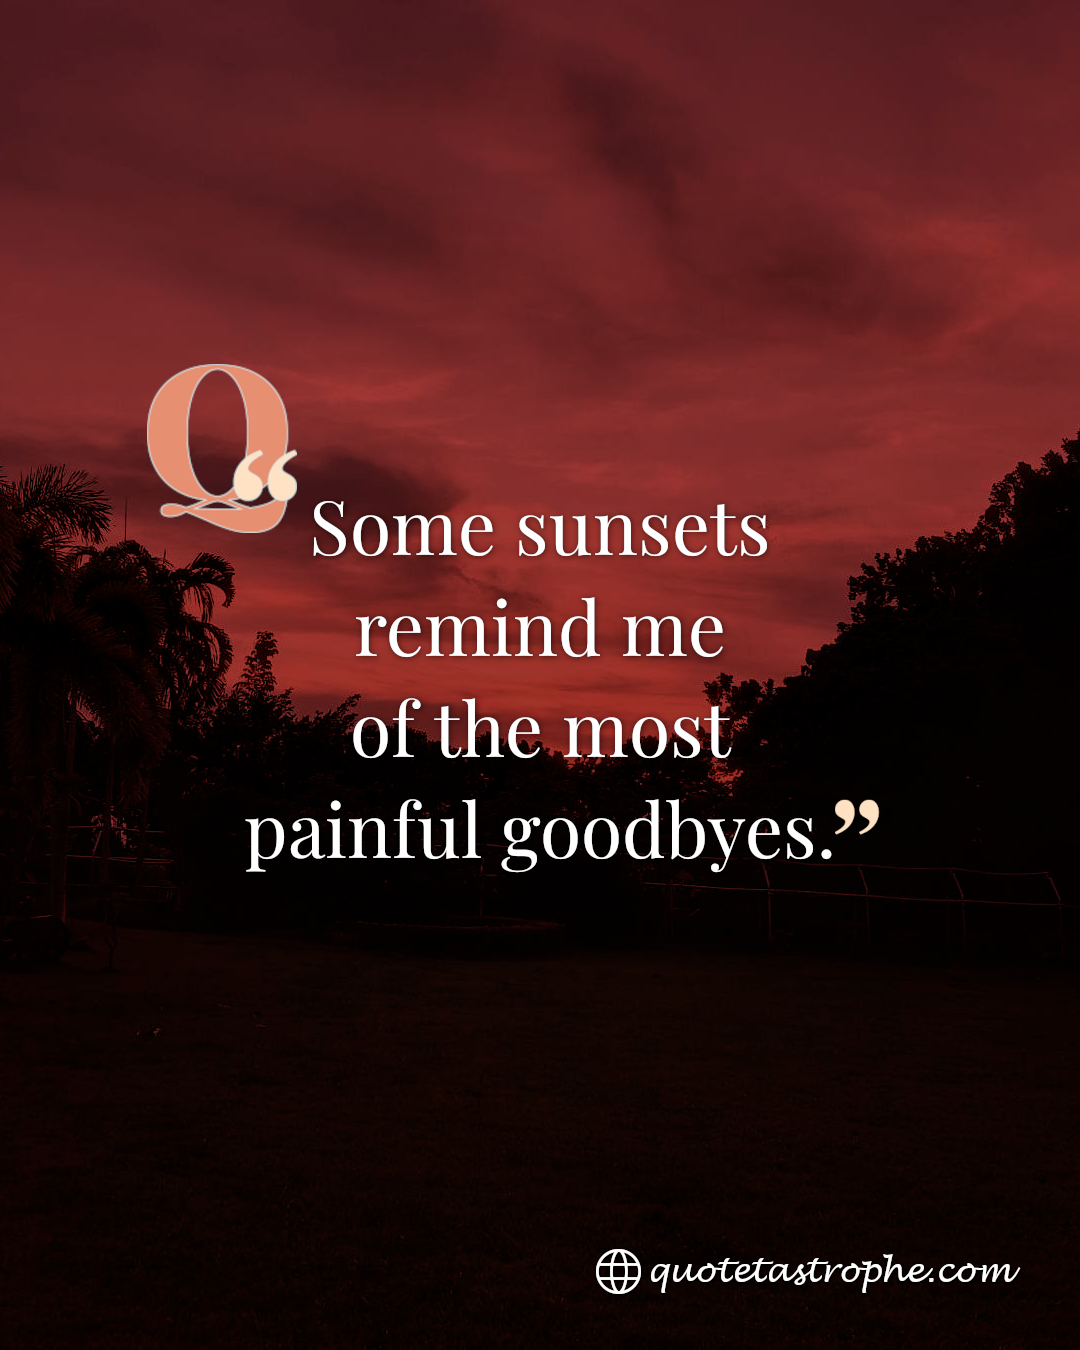 Some Sunsets Remind Me of Painful Goodbyes